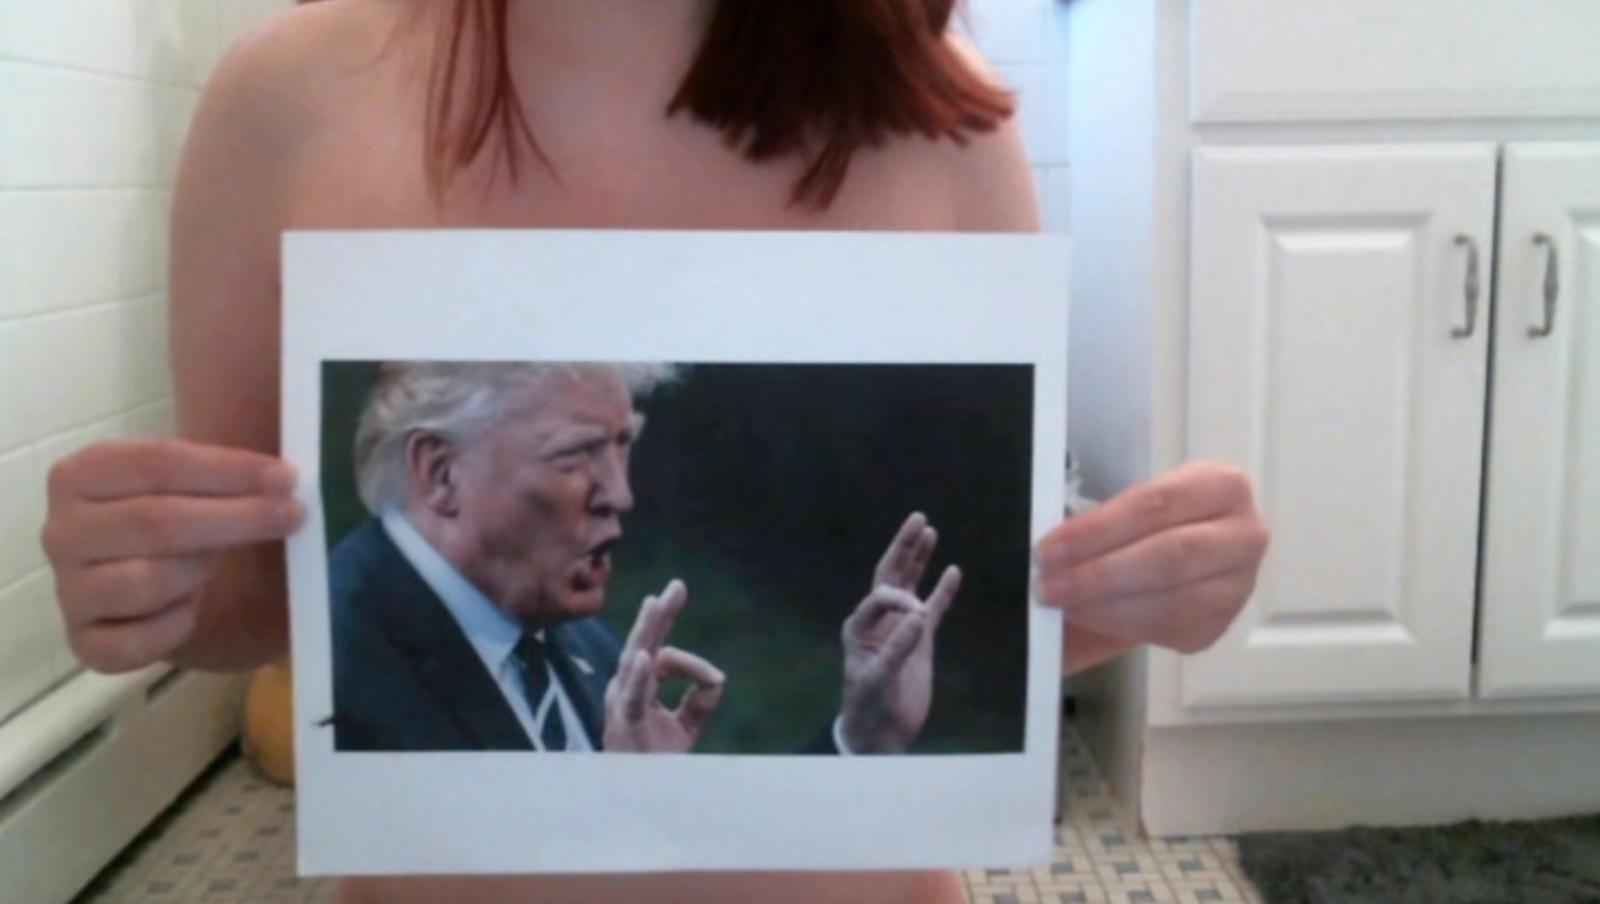 Photo by Autumn Gehenna with the username @autumn-gehenna, who is a star user,  November 20, 2019 at 9:13 PM and the text says 'Do you like pee, or hate Trump? Then check out my video! 

https://payment.unblur.media/store/Autumn%20Gehenna/15375'